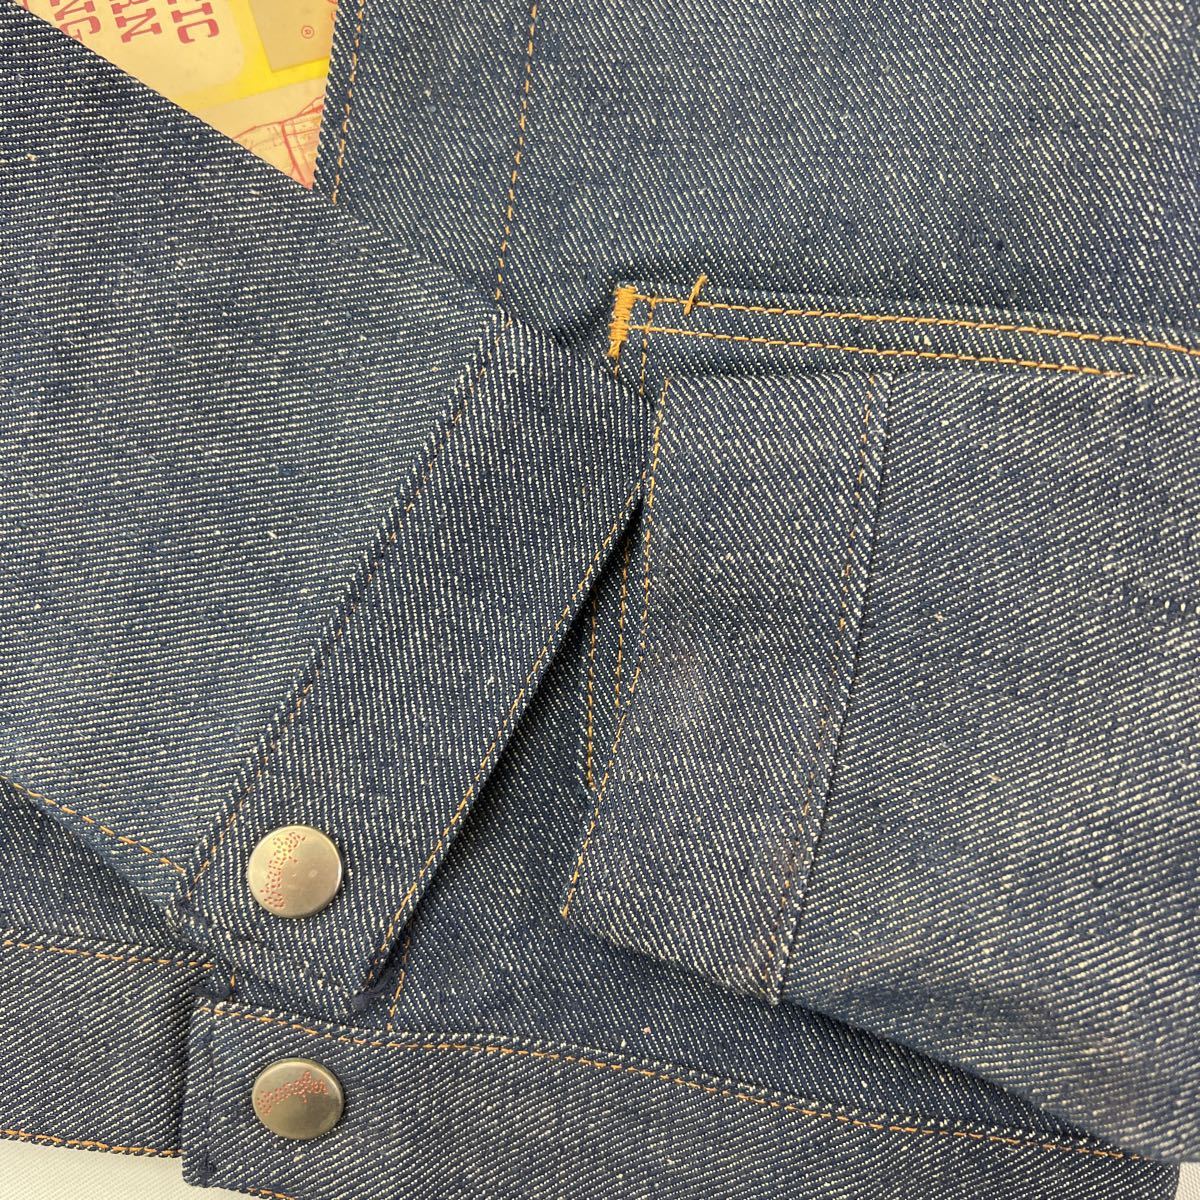 USA made * Wrangler 70s rare * dead stock Flyer attaching Kids 5 -years old for Denim jacket G Jean American Casual US old clothes Wrangler #S1428